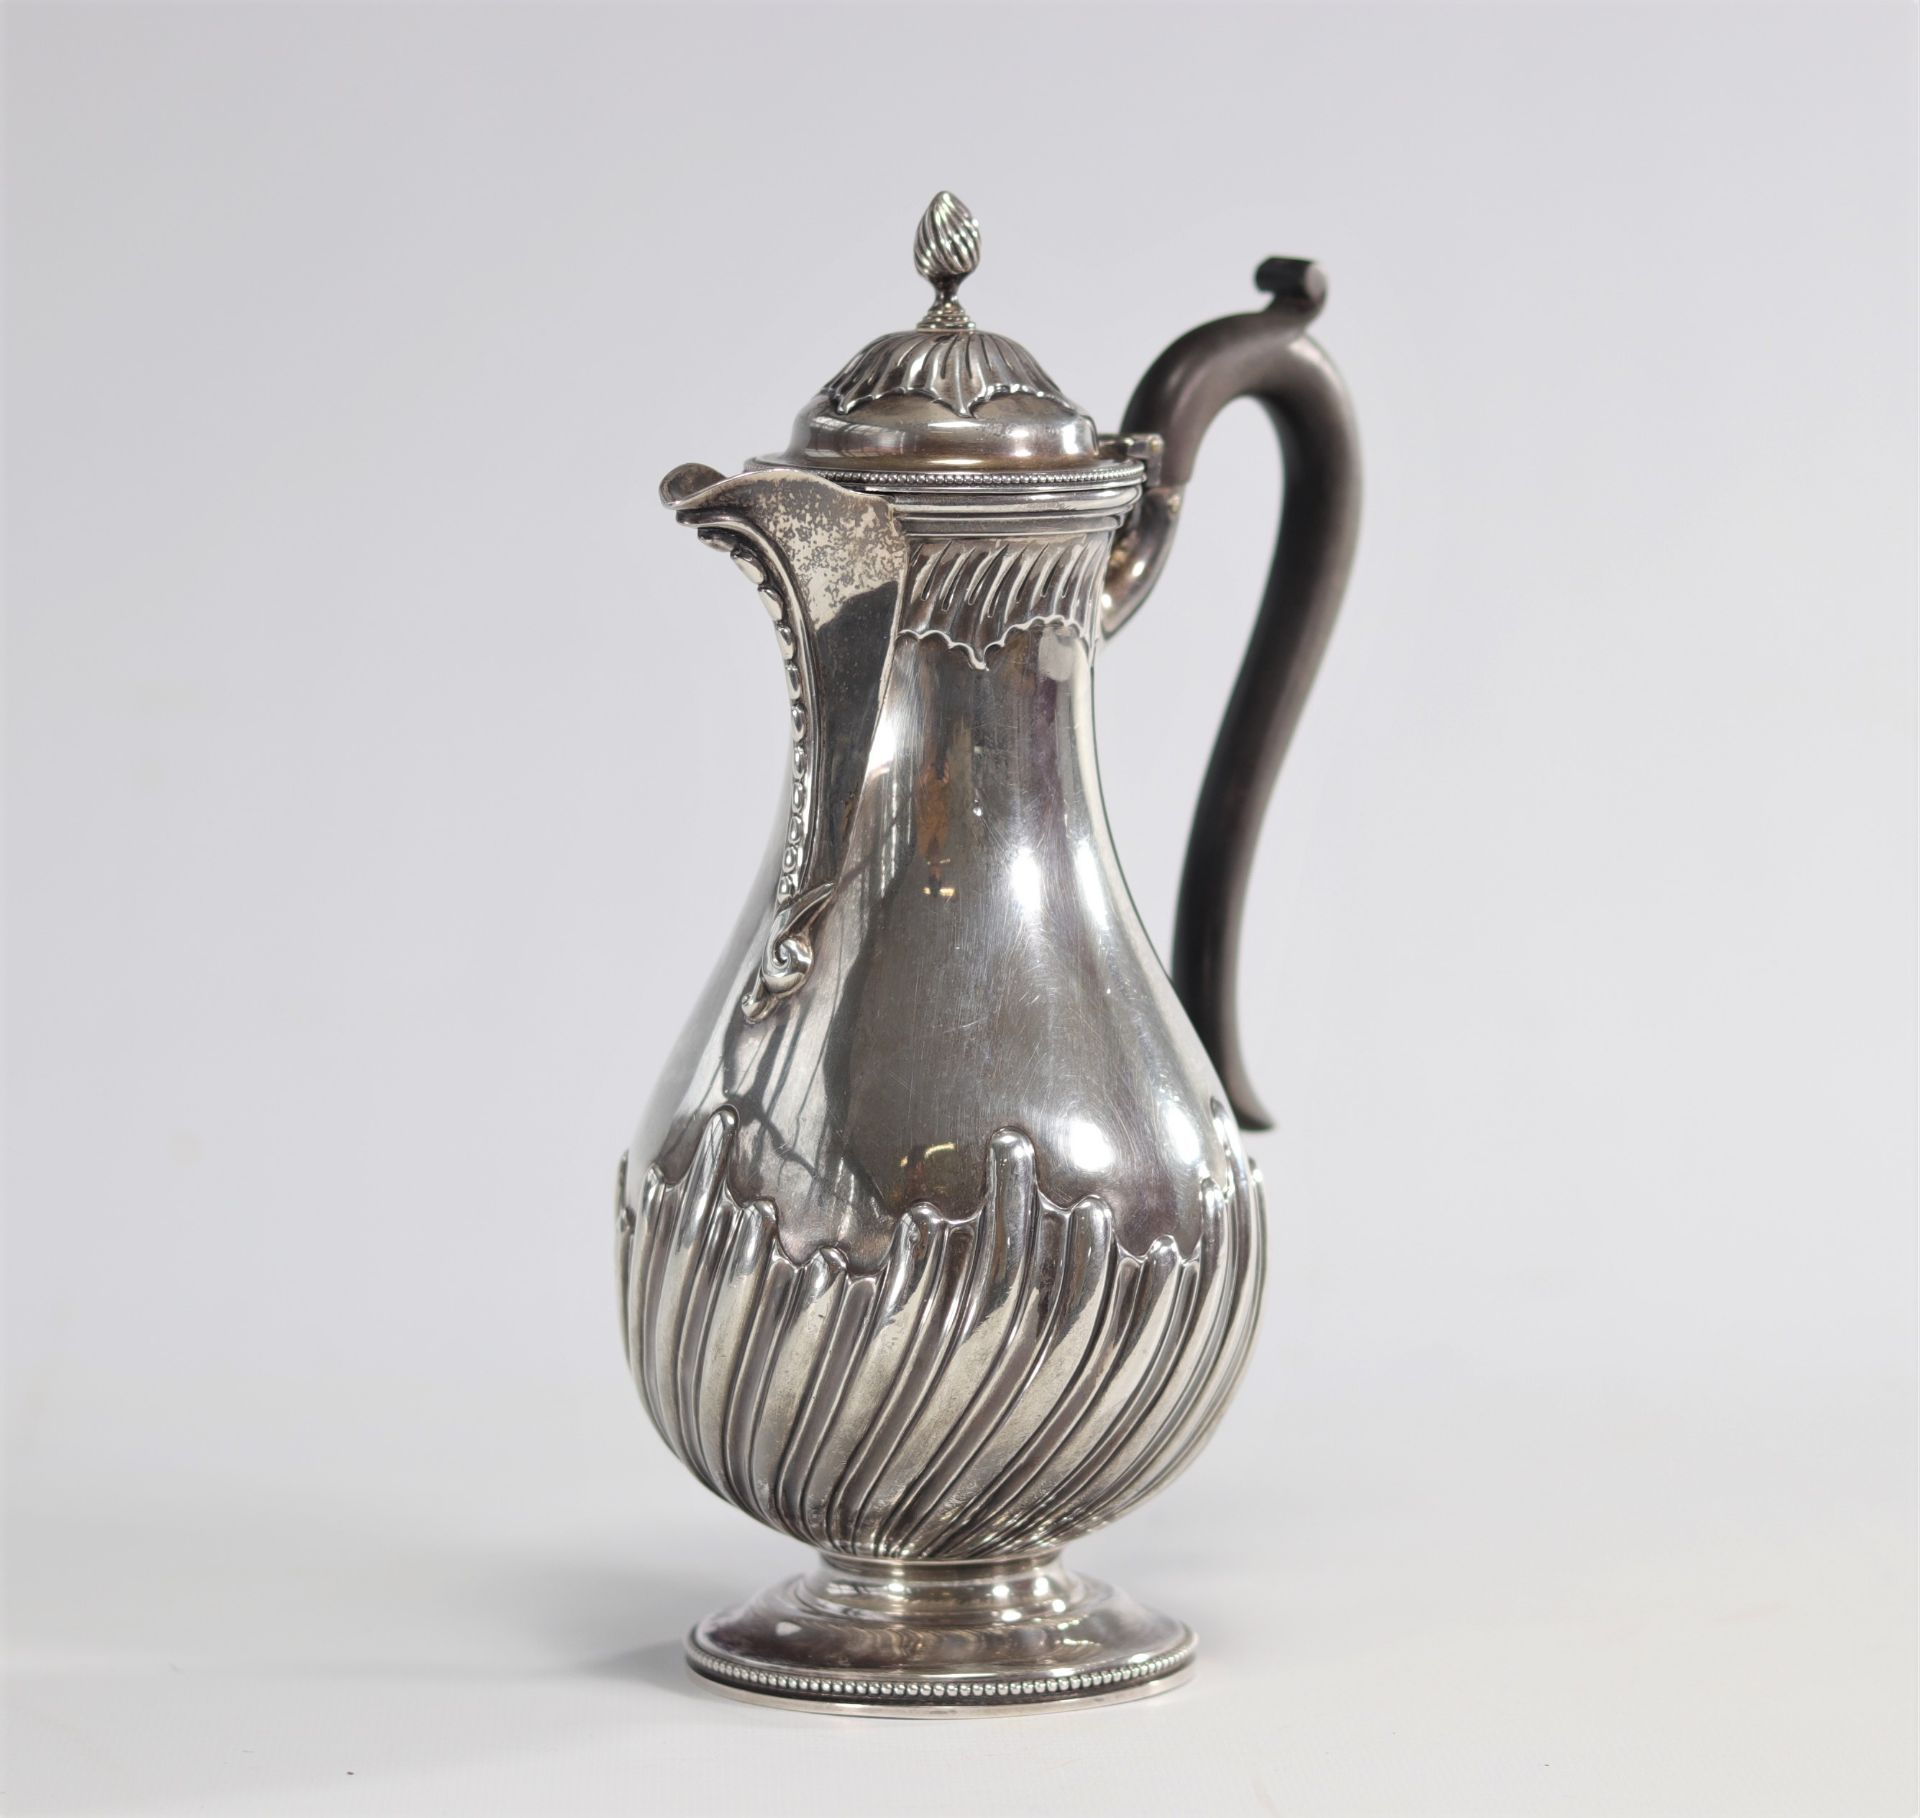 Solid silver coffee pot Louis XV style, English hallmarks - Image 2 of 4